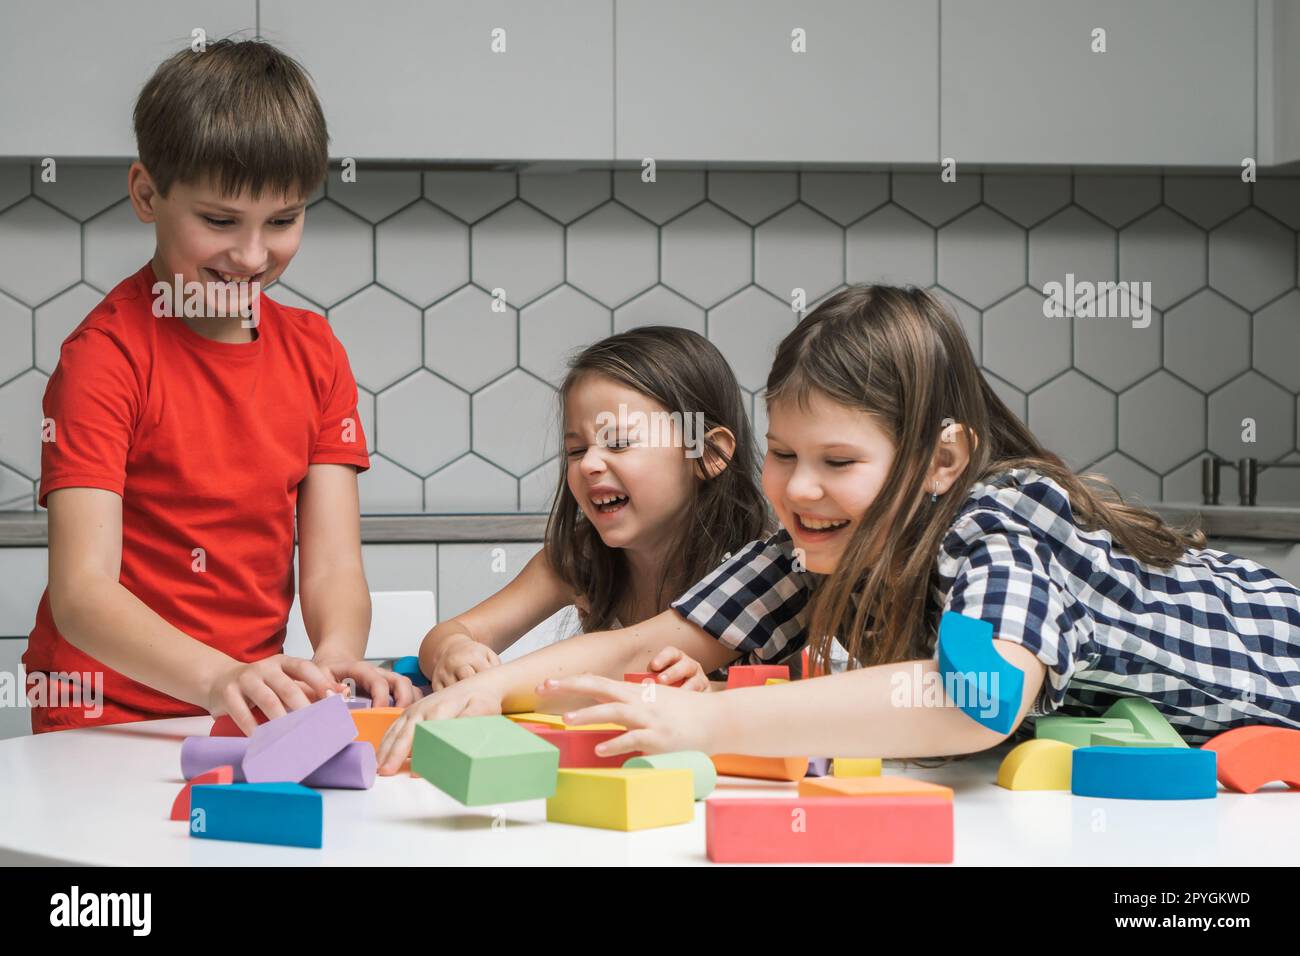 Laughing, funny and playful children of girls fooling around and boy playing with colorful bricks and building elements Stock Photo